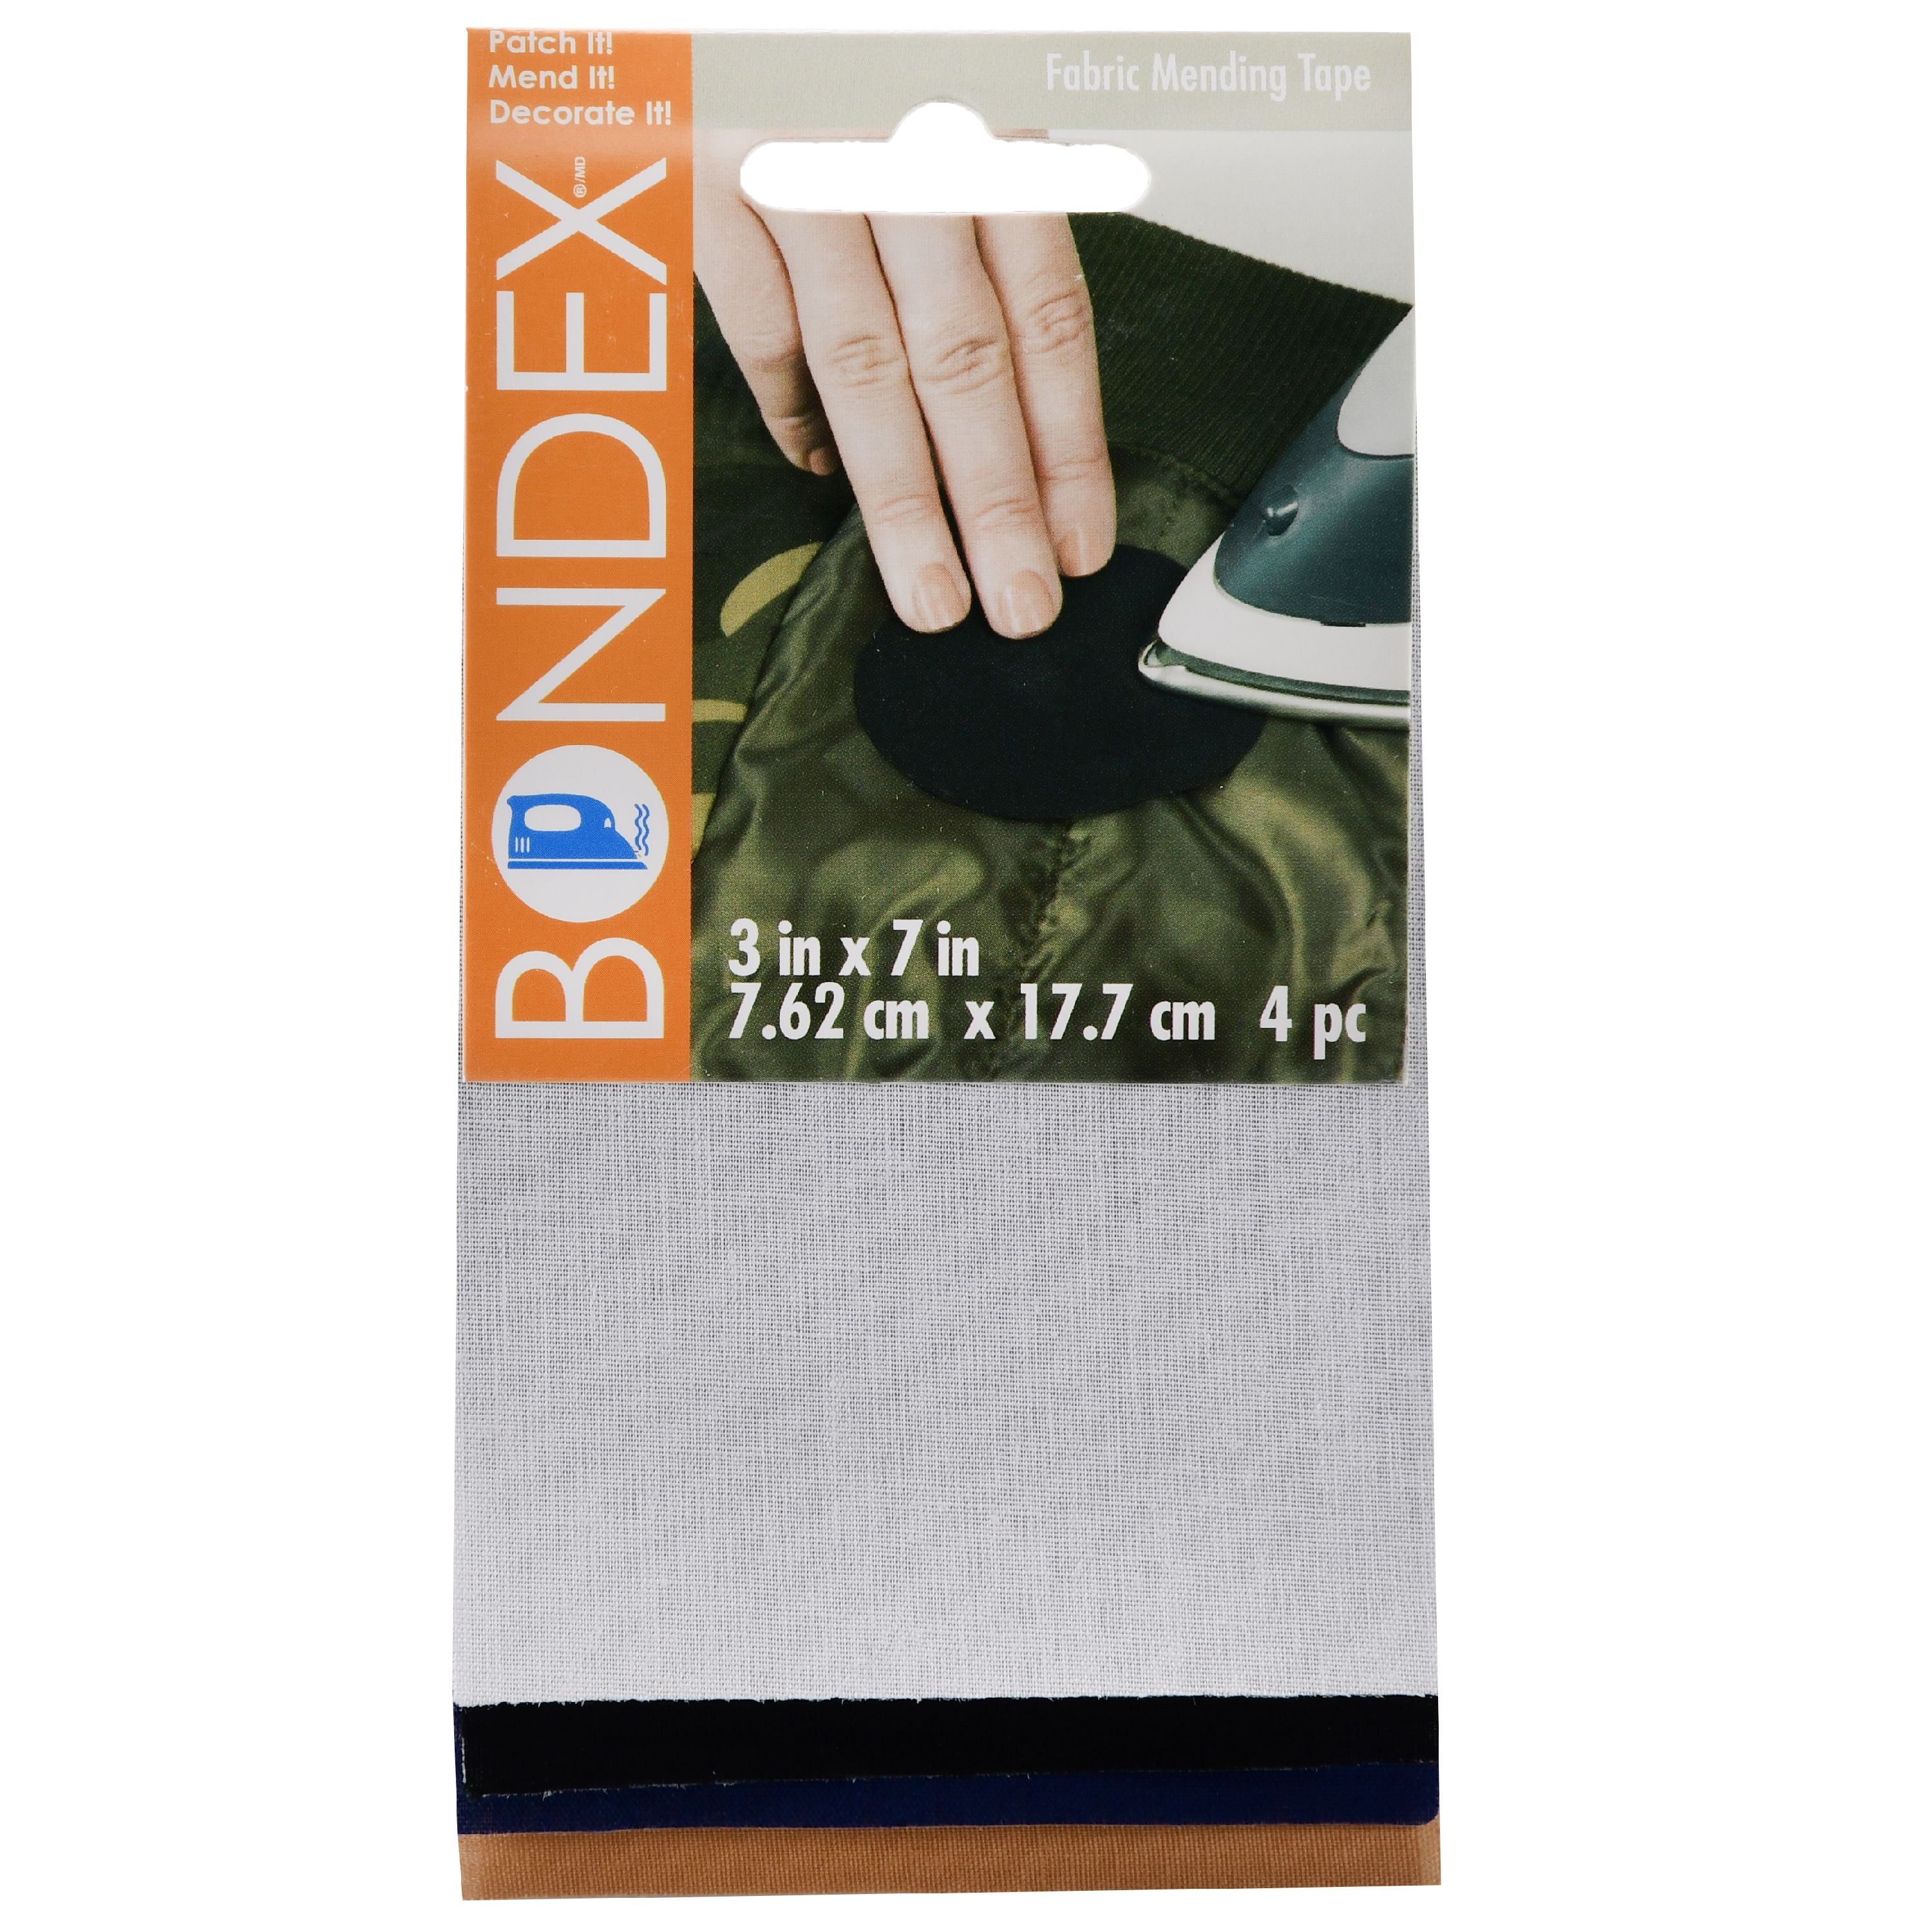 Bondex Mend and Repair with No Sew Iron-On Patch Fabric Mending Tape 1 —  Grand River Art Supply